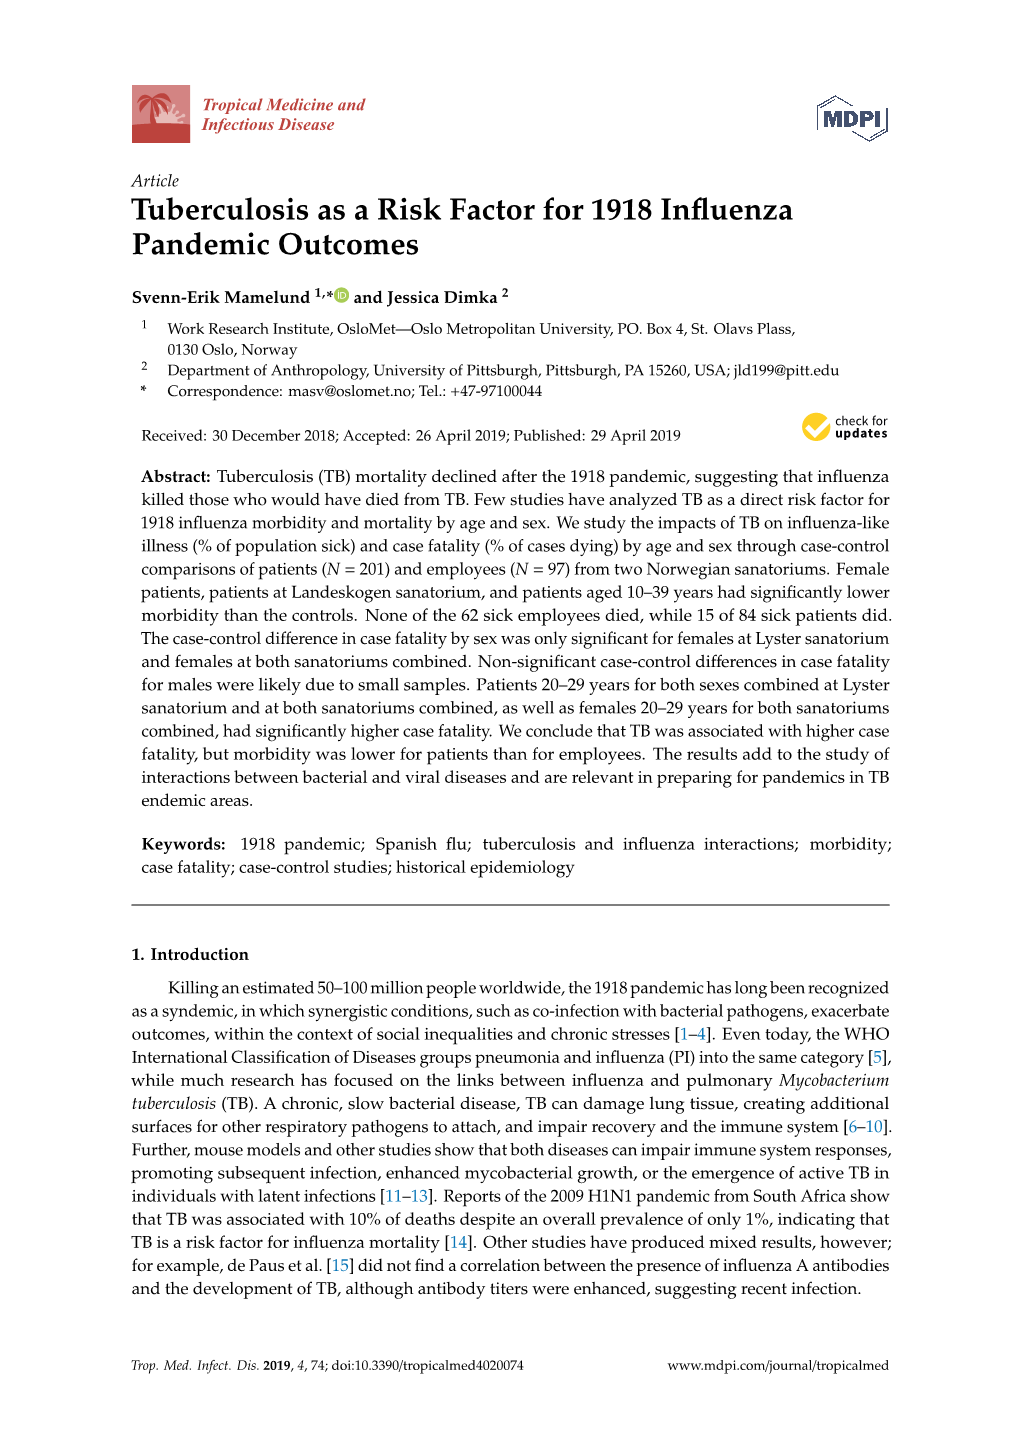 Tuberculosis As a Risk Factor for 1918 Influenza Pandemic Outcomes